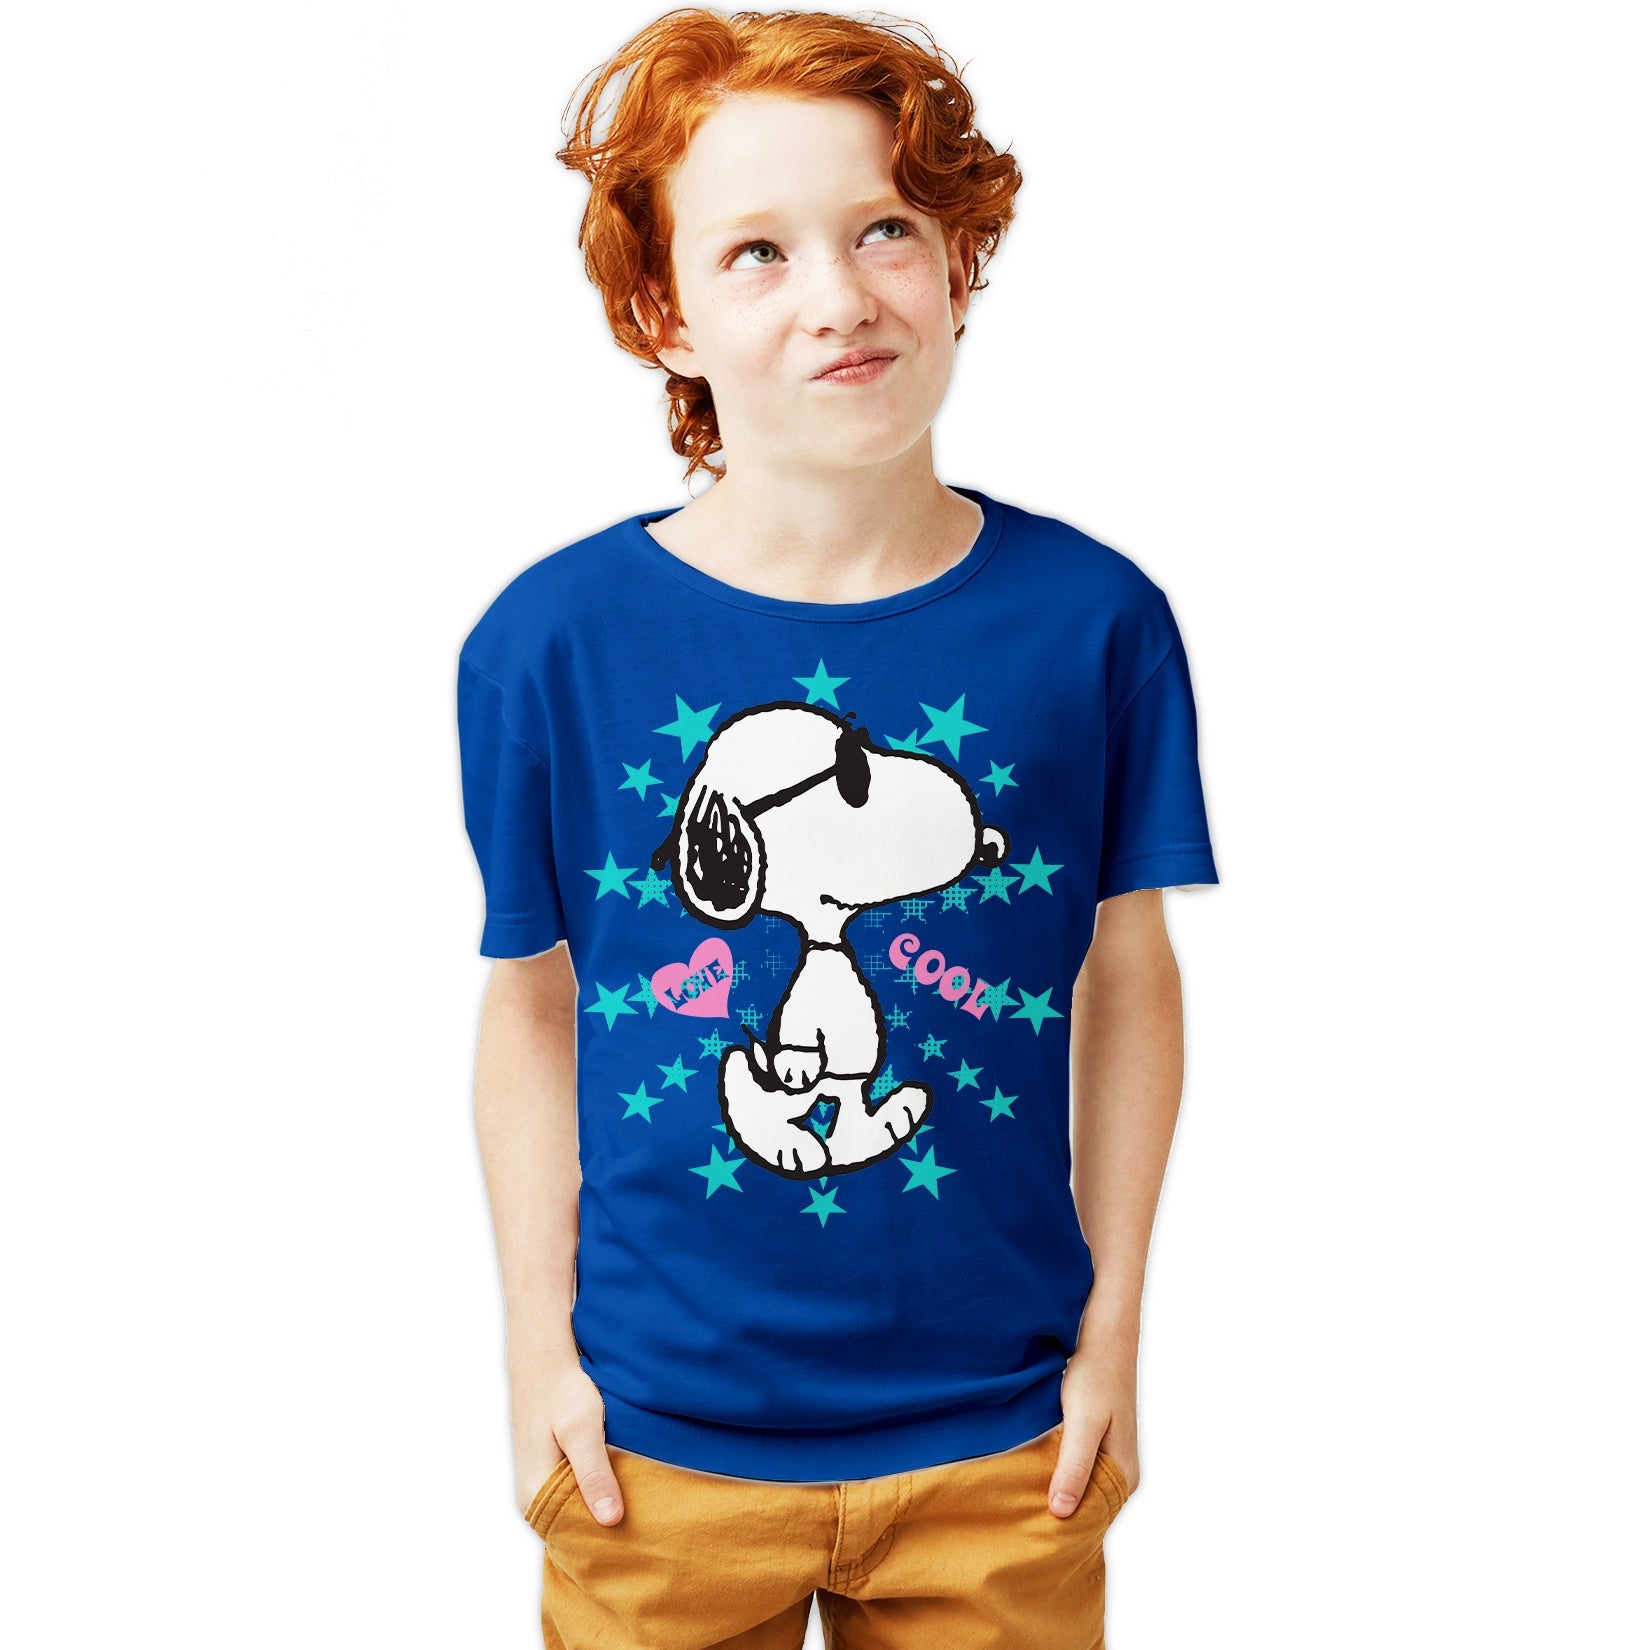 Peanuts Snoopy Cool Official Youth T-Shirt